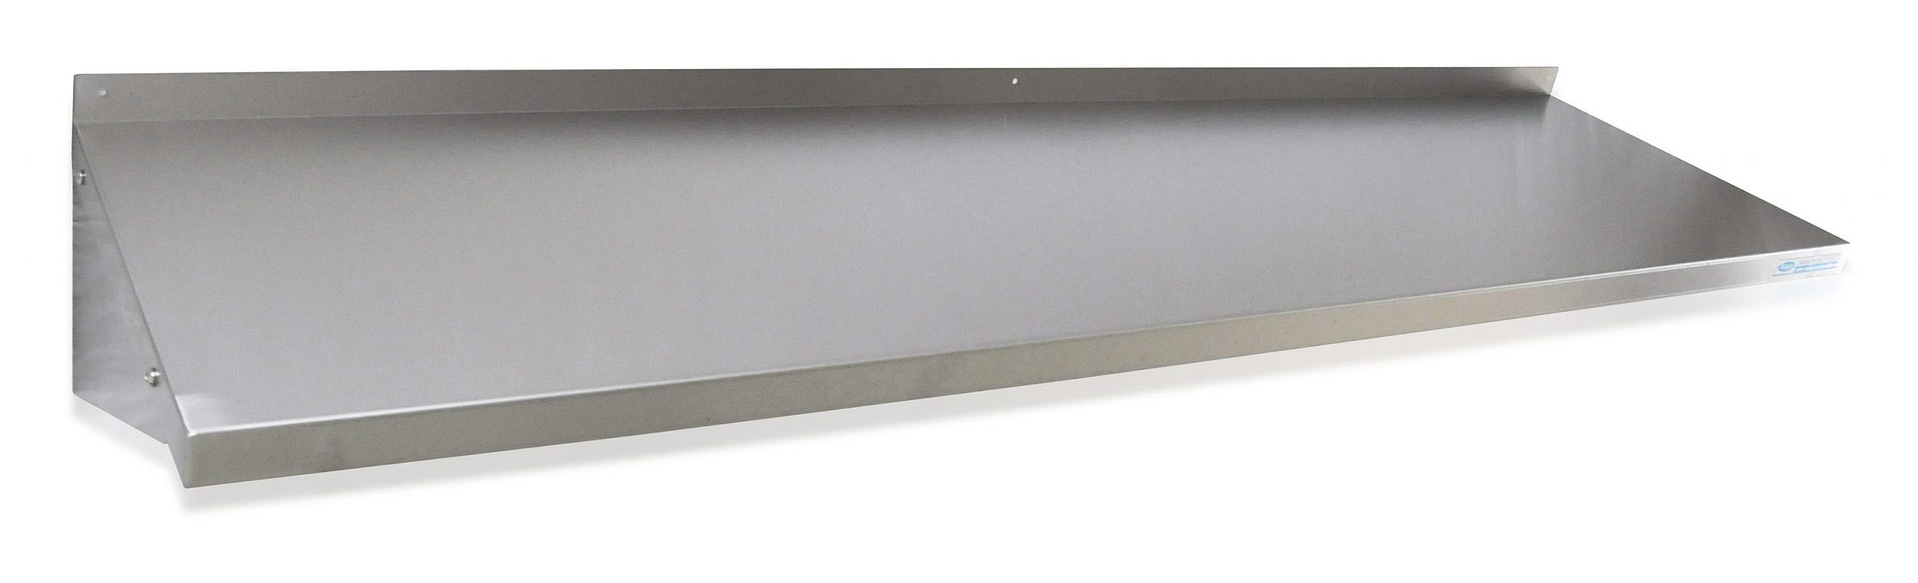 Stainless Steel Solid Wall Shelf, 1800 X 450mm deep